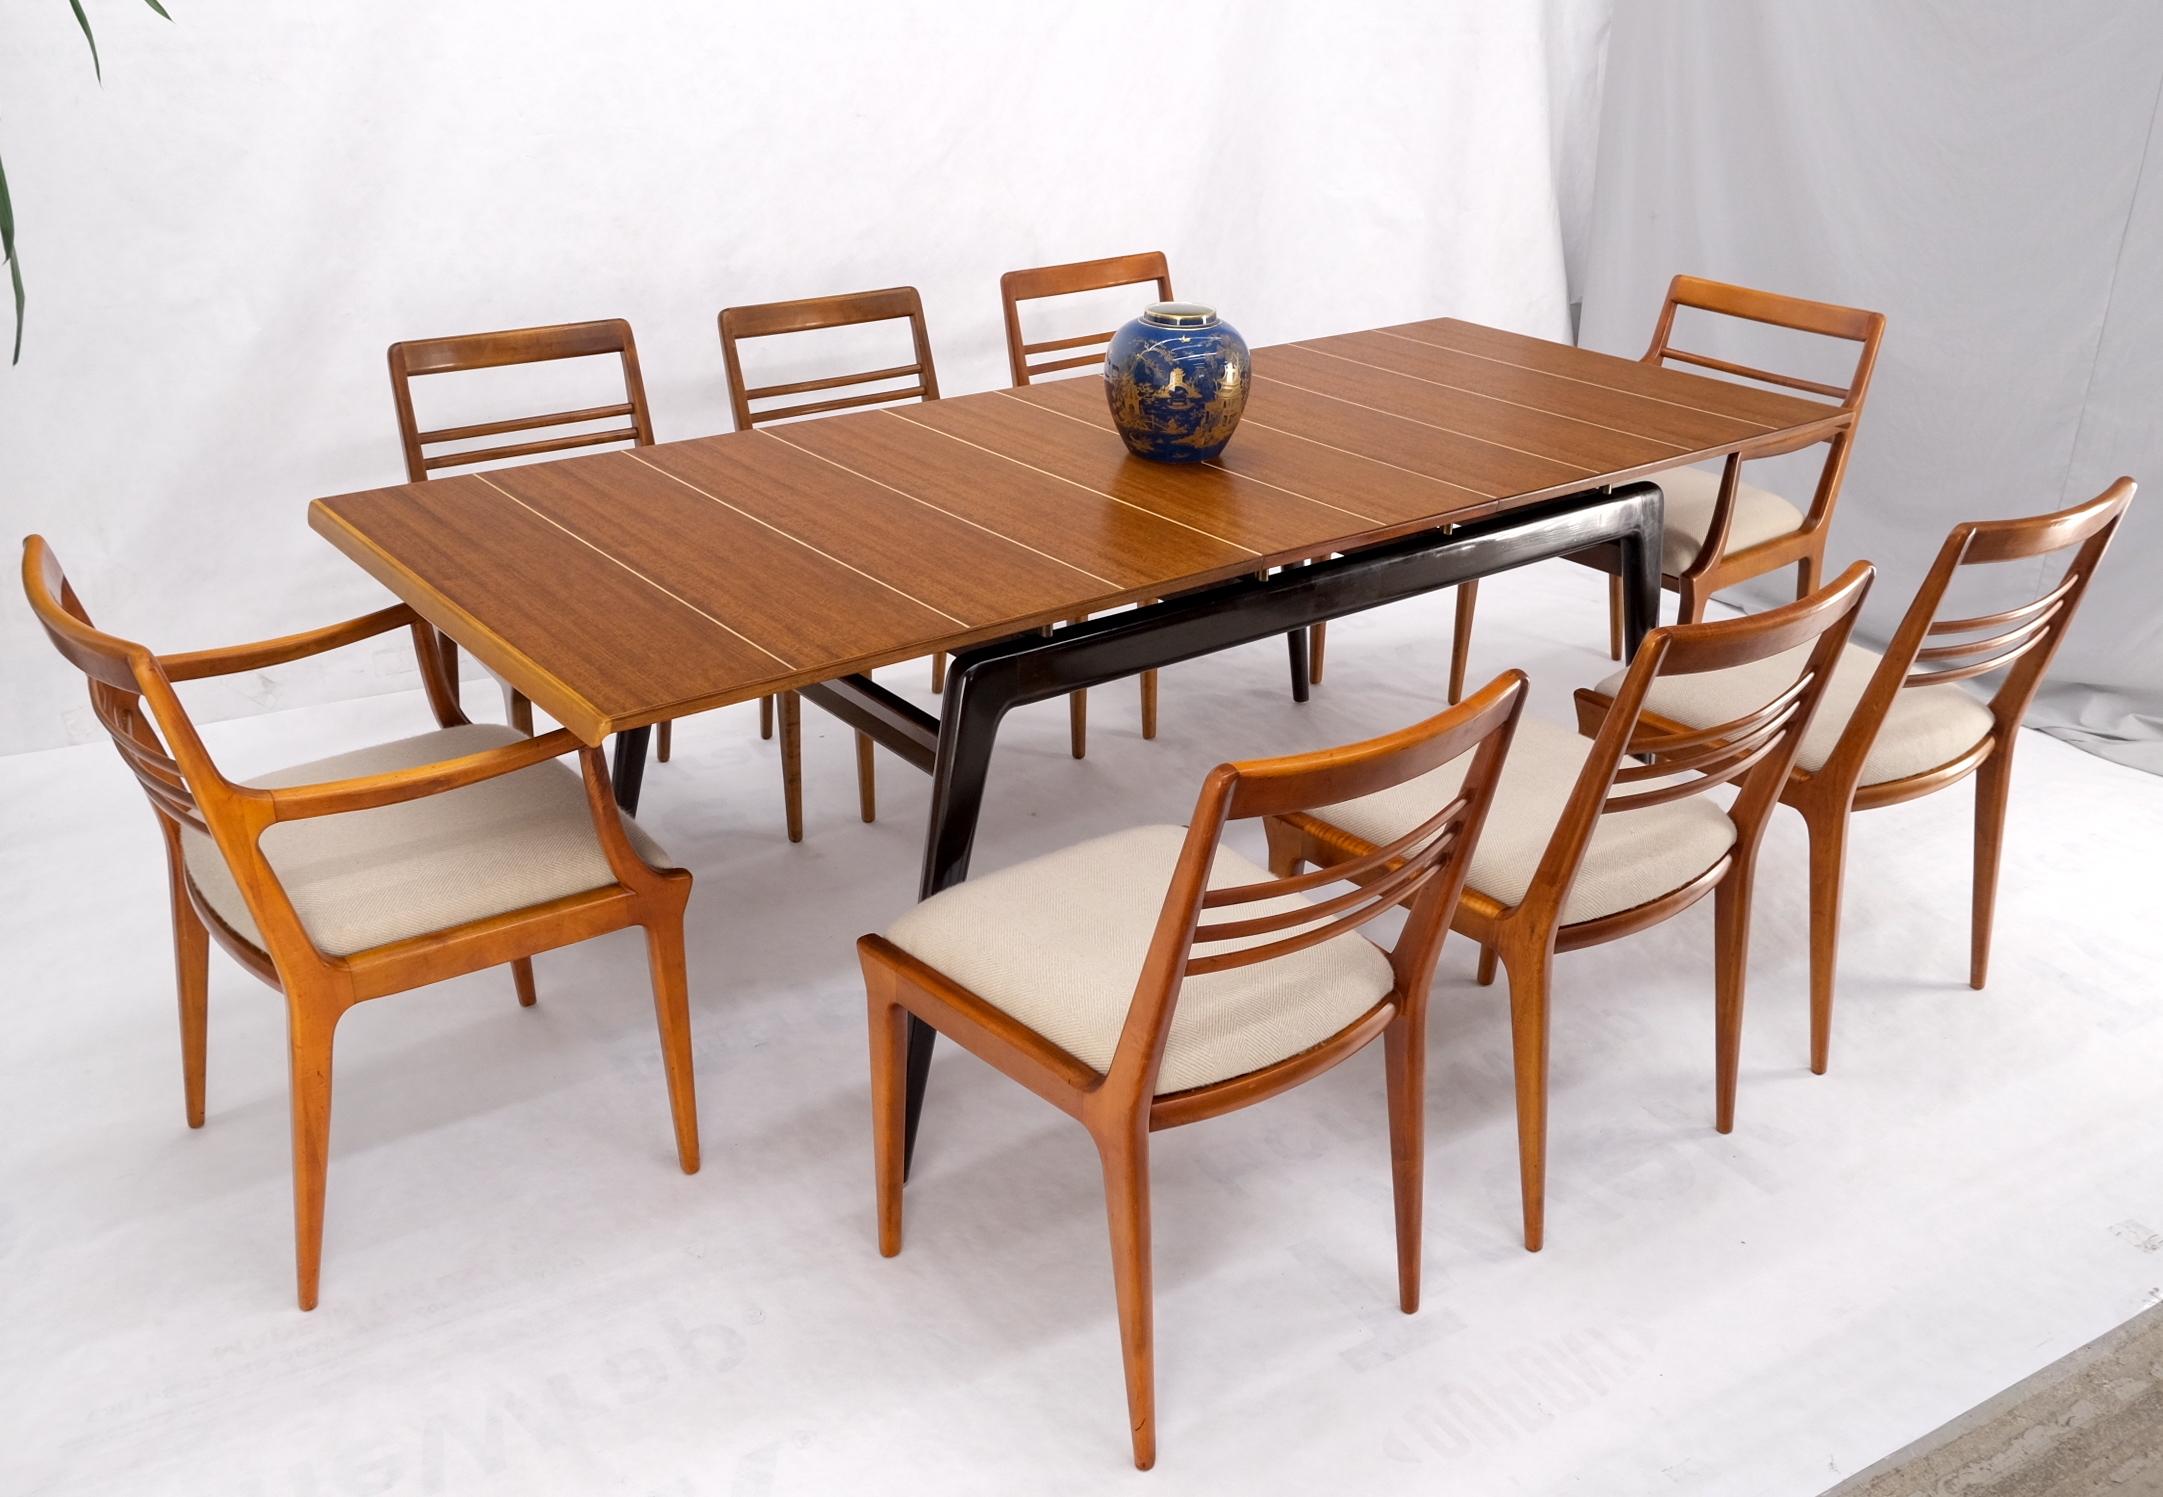 Italian Mid-Century Modern Dining Table 8 Chairs Set New Linen Upholstery Seats For Sale 13